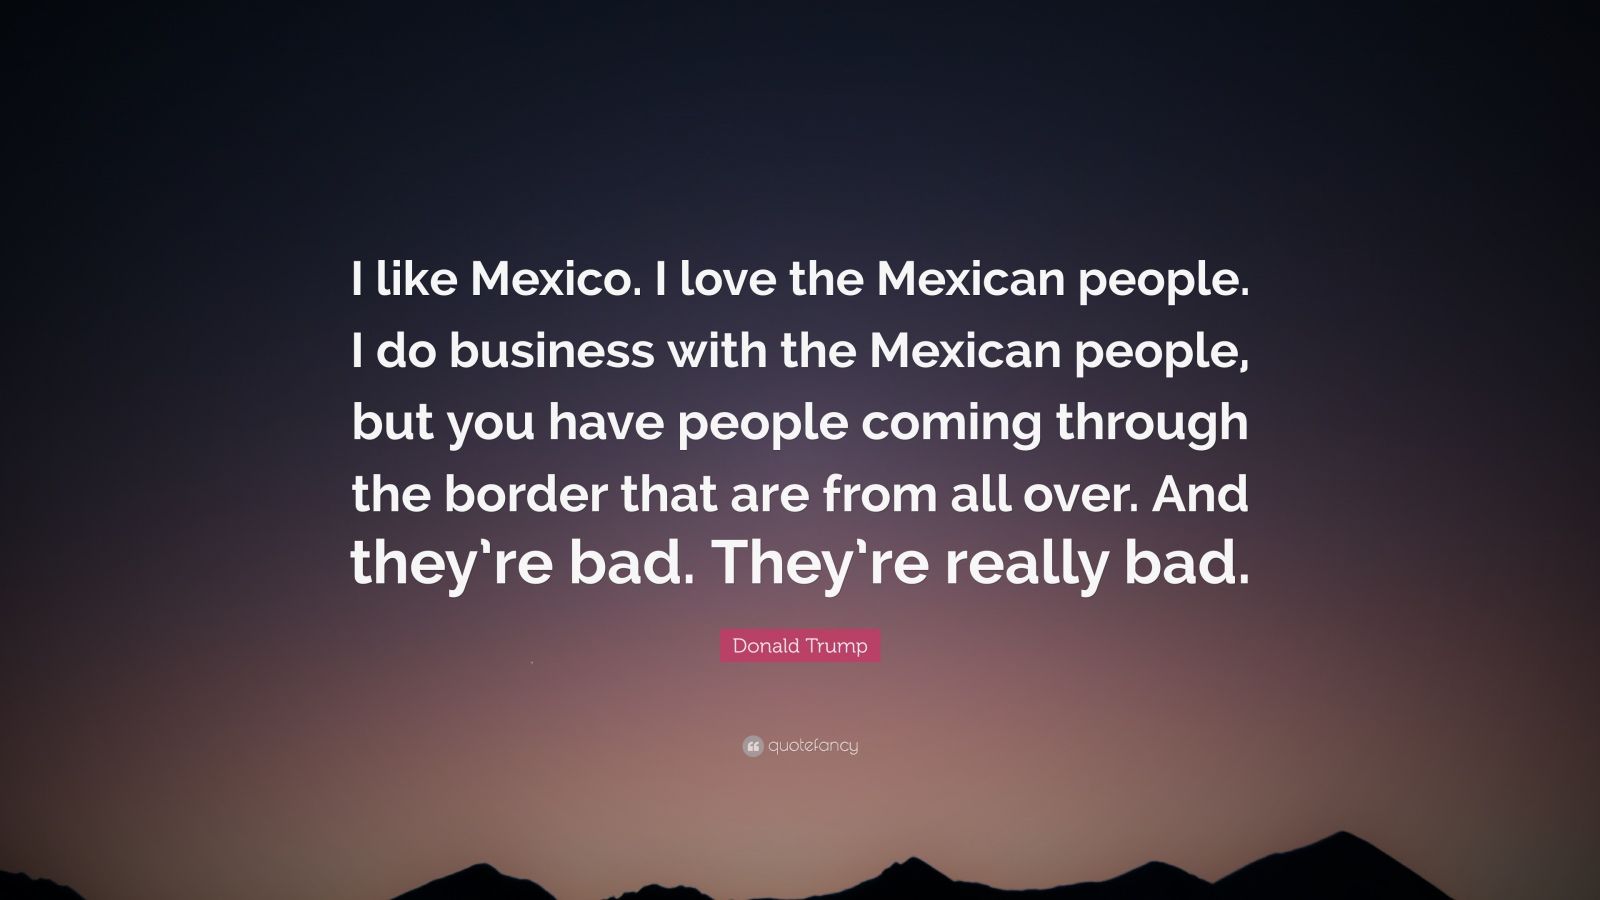 Donald Trump Quote: “I like Mexico. I love the Mexican people. I do